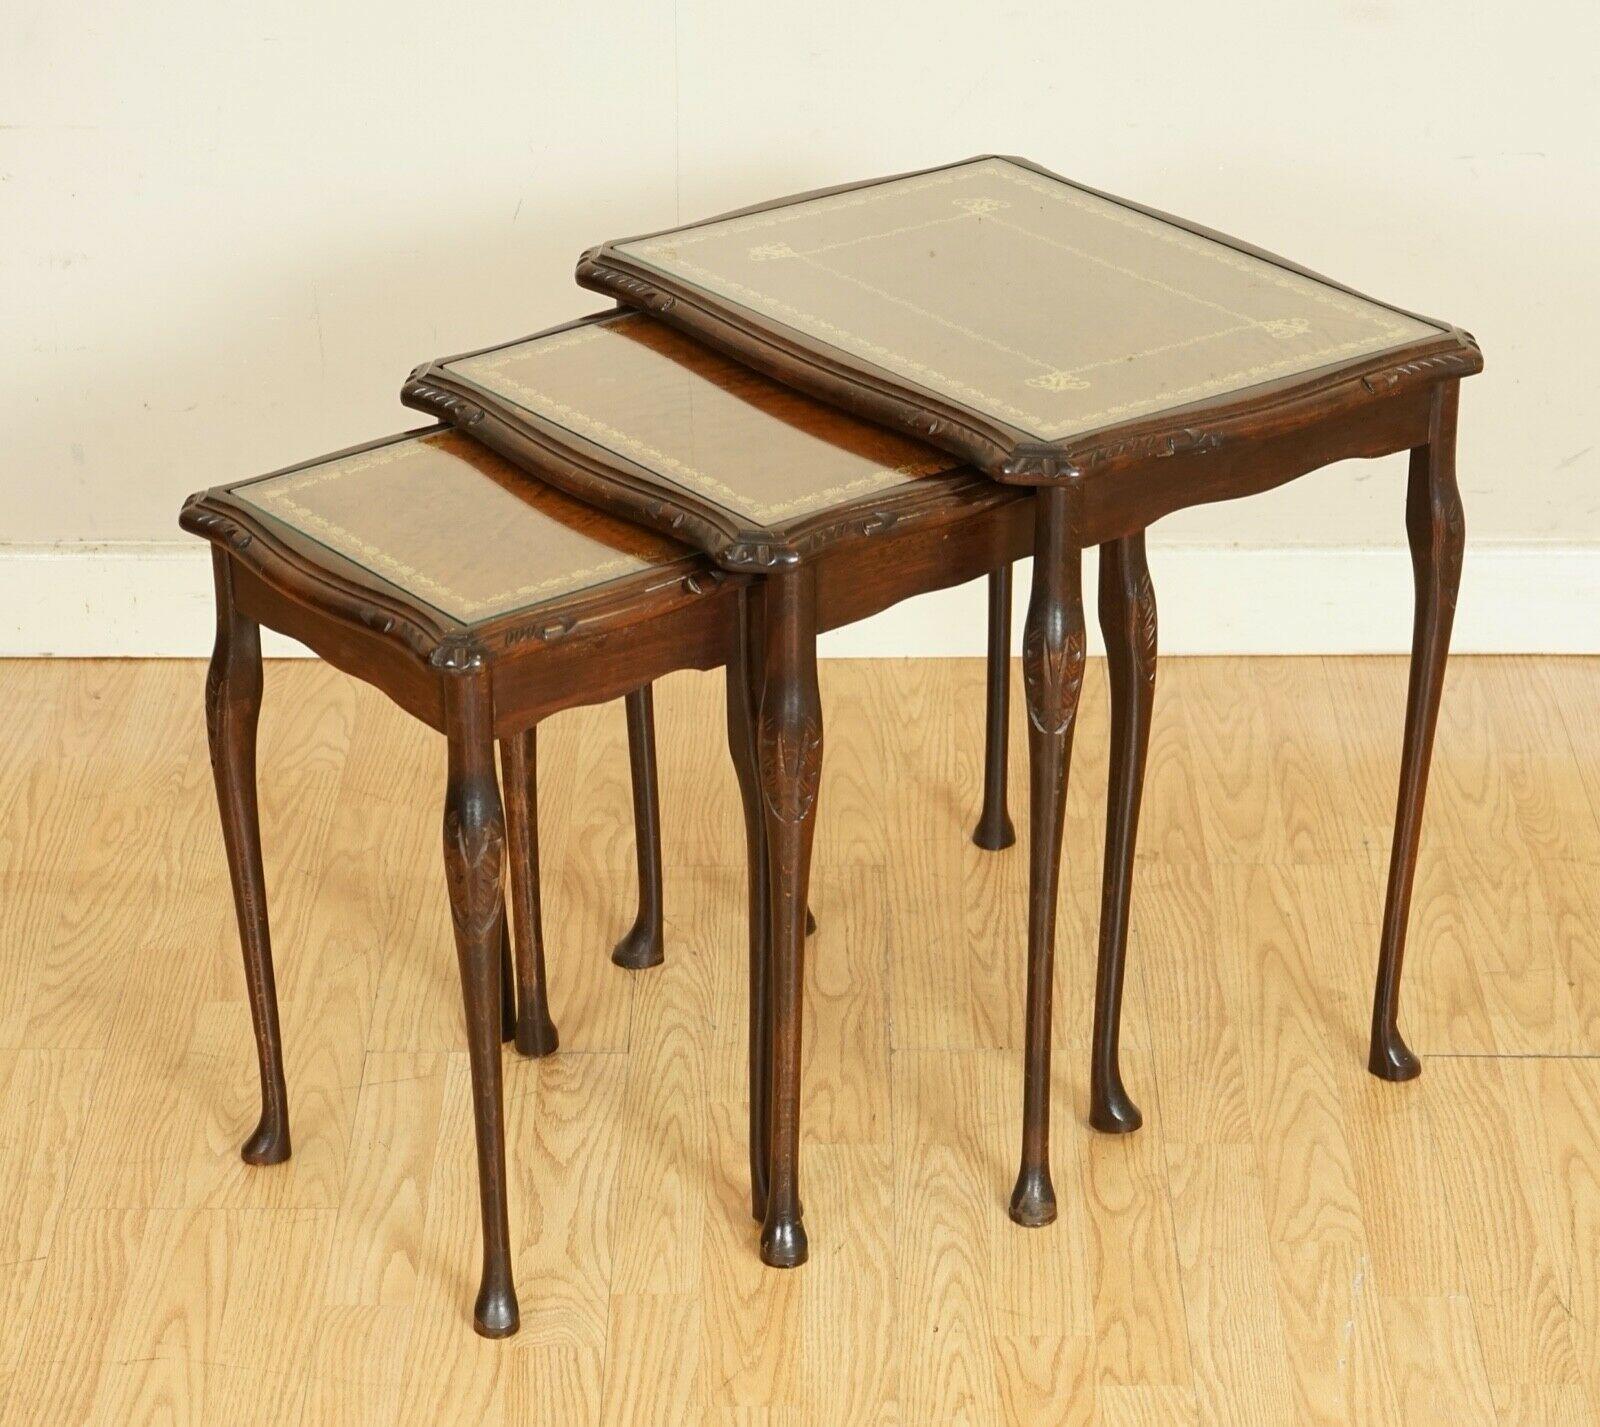 Hand-Crafted Hardwood Nest of Tables Queen Anne Style Legs with Brown Embossed Leather Top For Sale